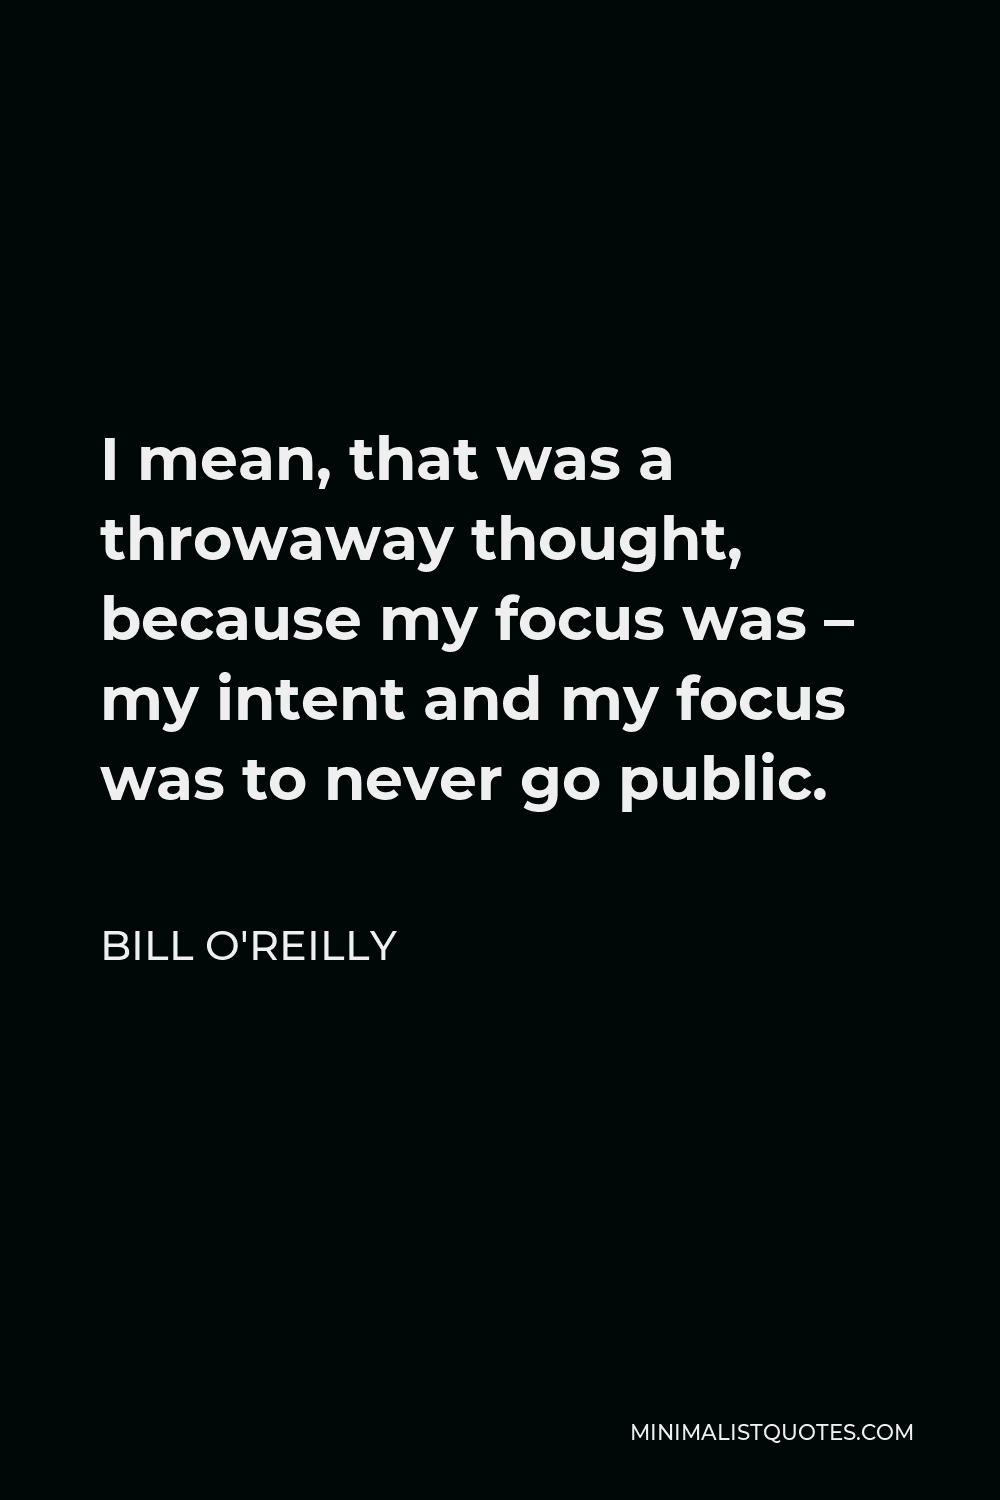 Bill O'Reilly Quote - I mean, that was a throwaway thought, because my focus was – my intent and my focus was to never go public.